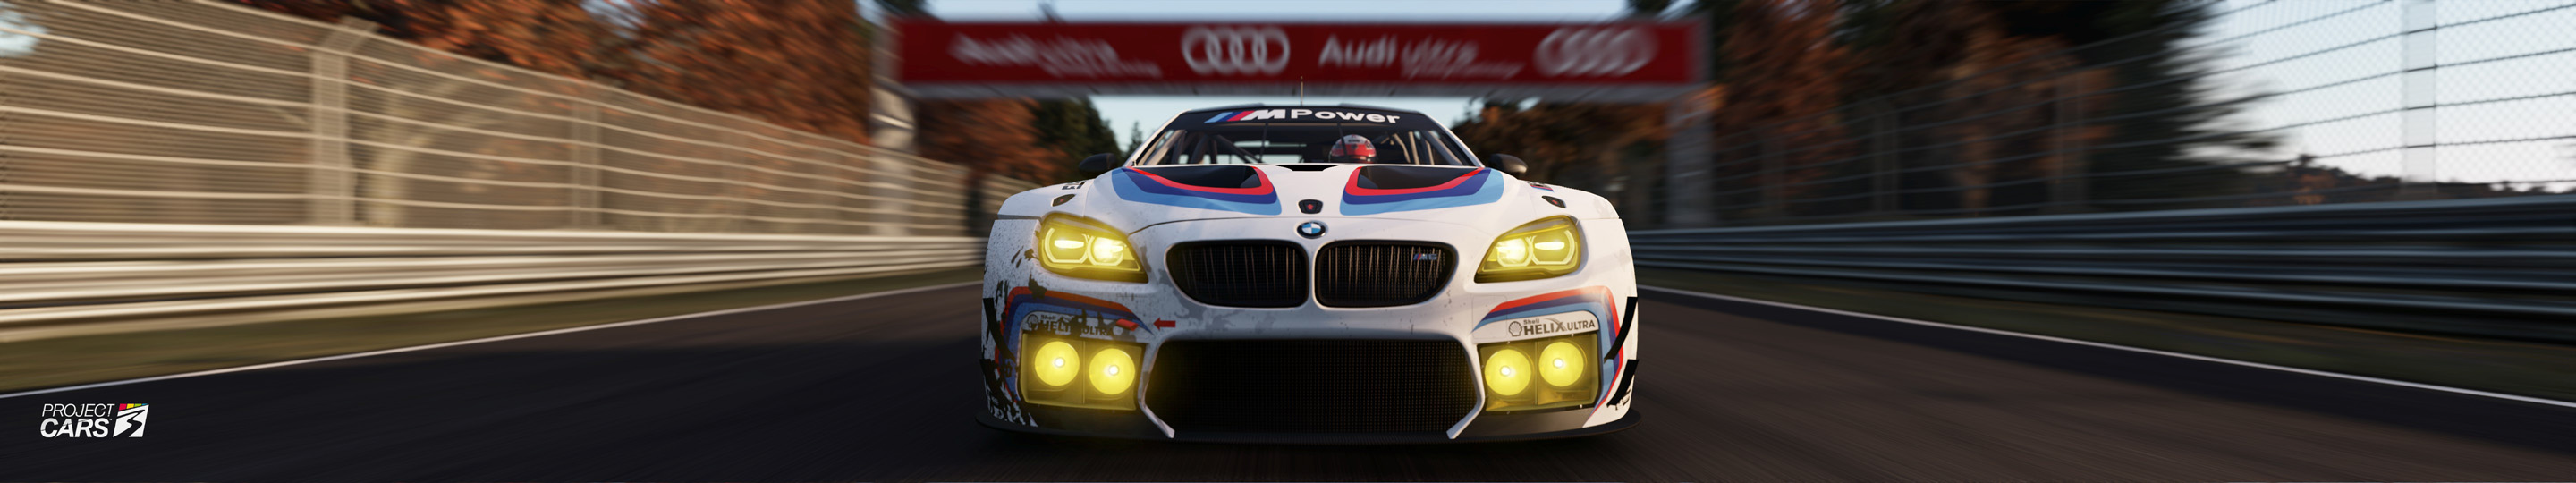 2 PROJECT CARS 3 BMW GT3 on NORDS copy.jpg